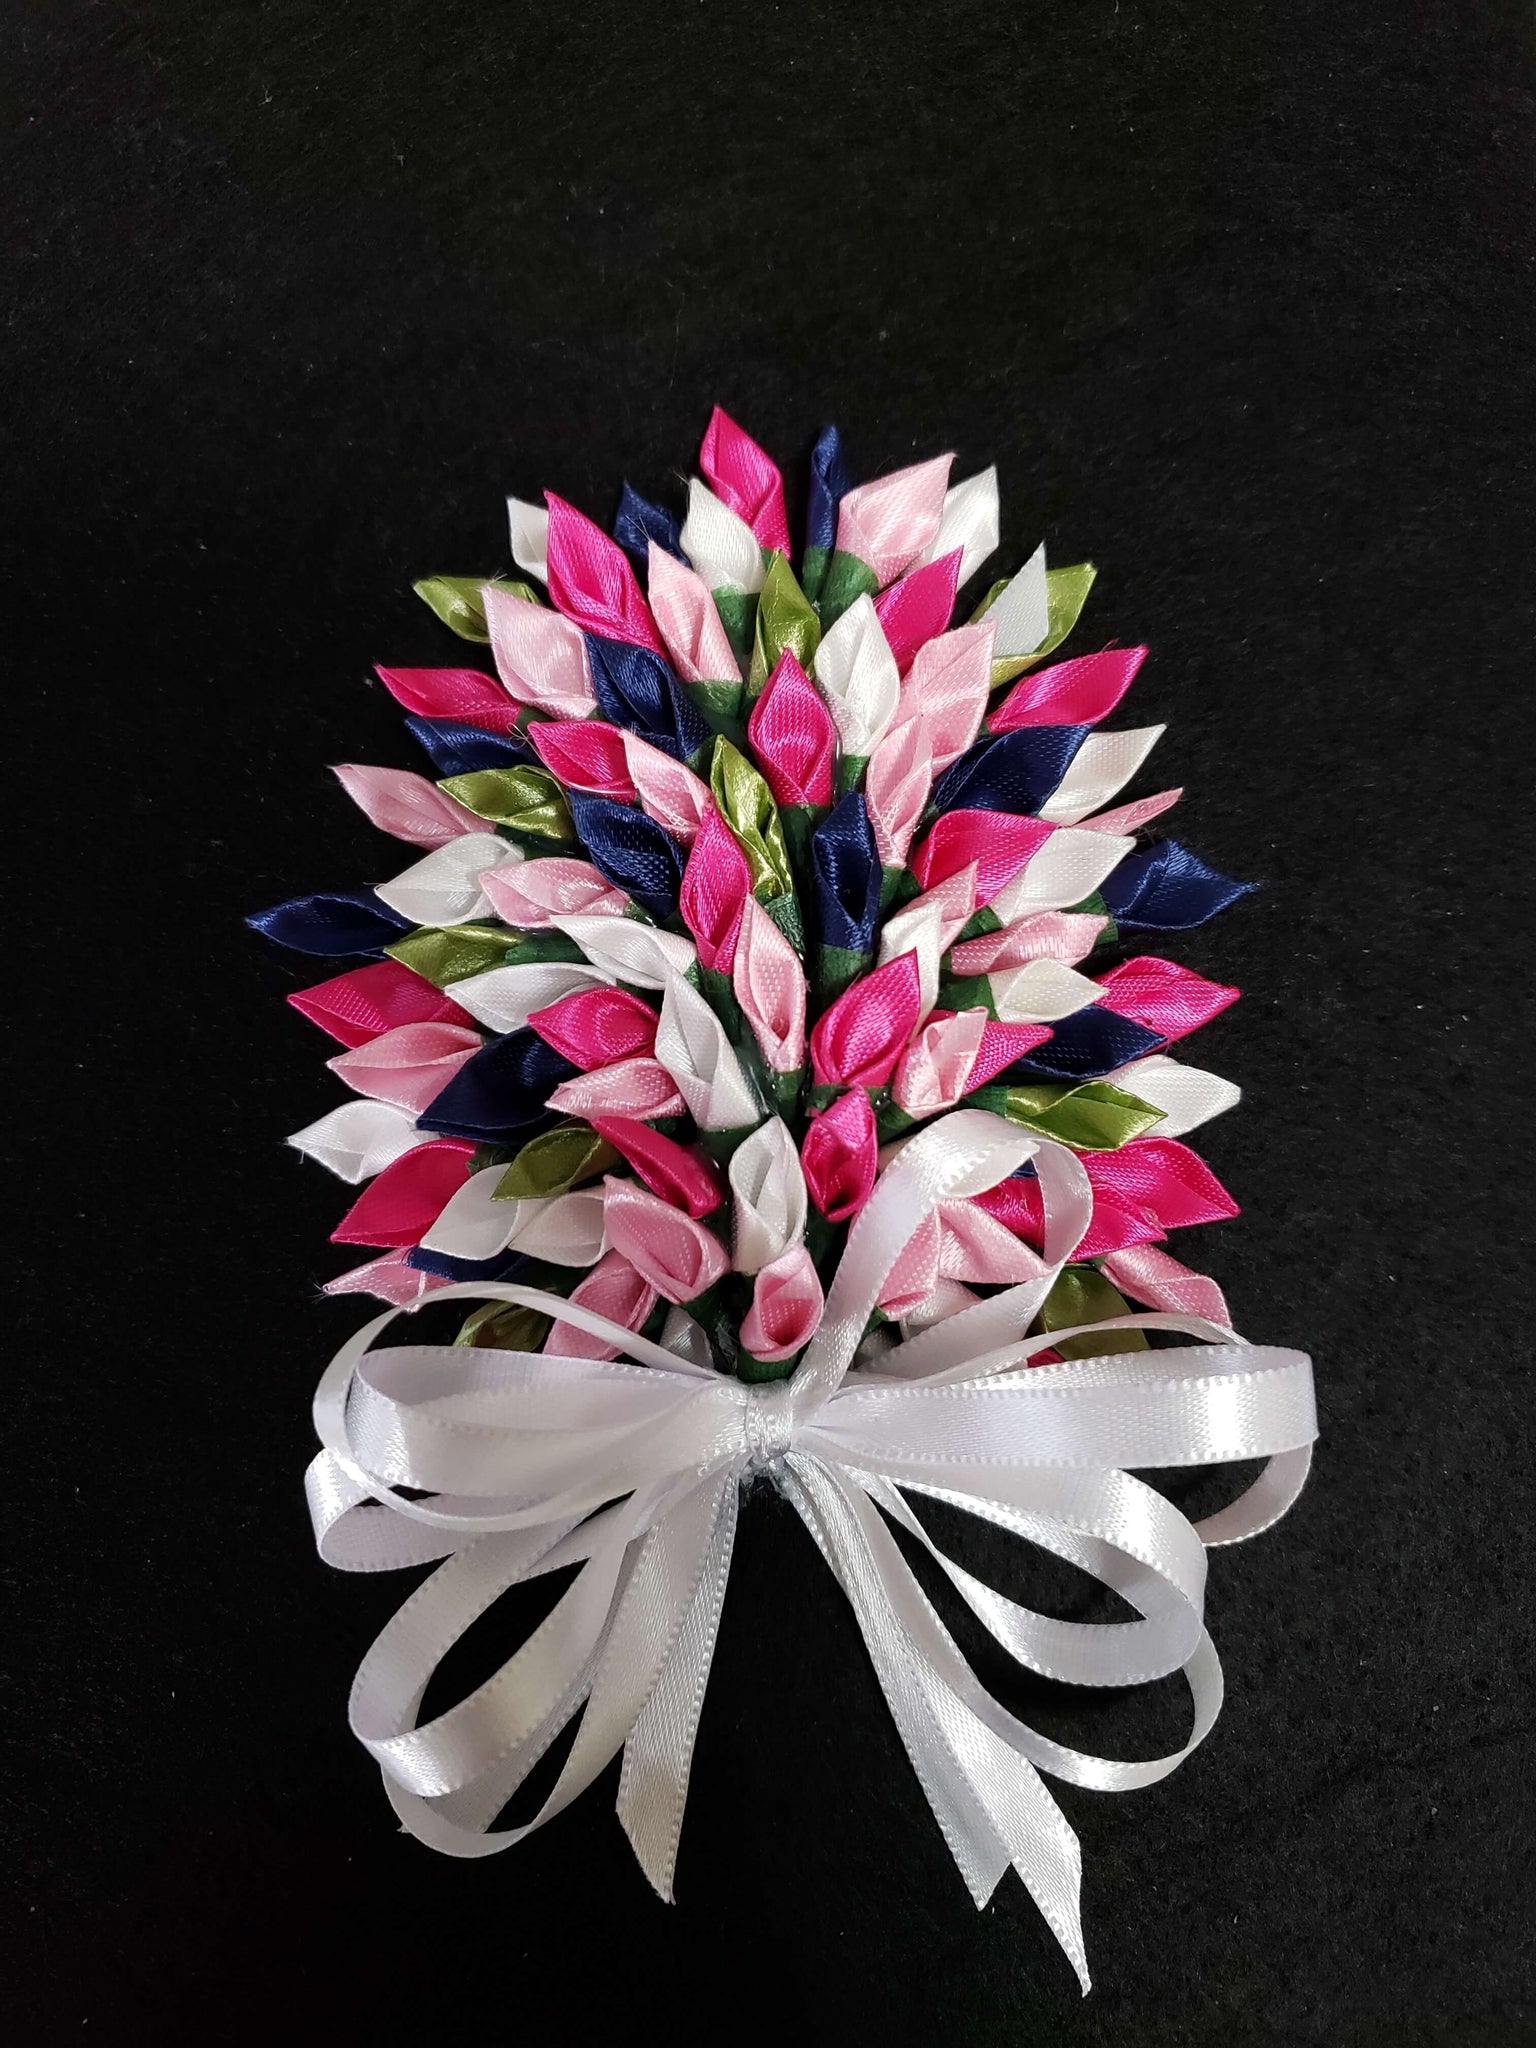 Creative Ribbon Bouquet Ideas for Every Occasion